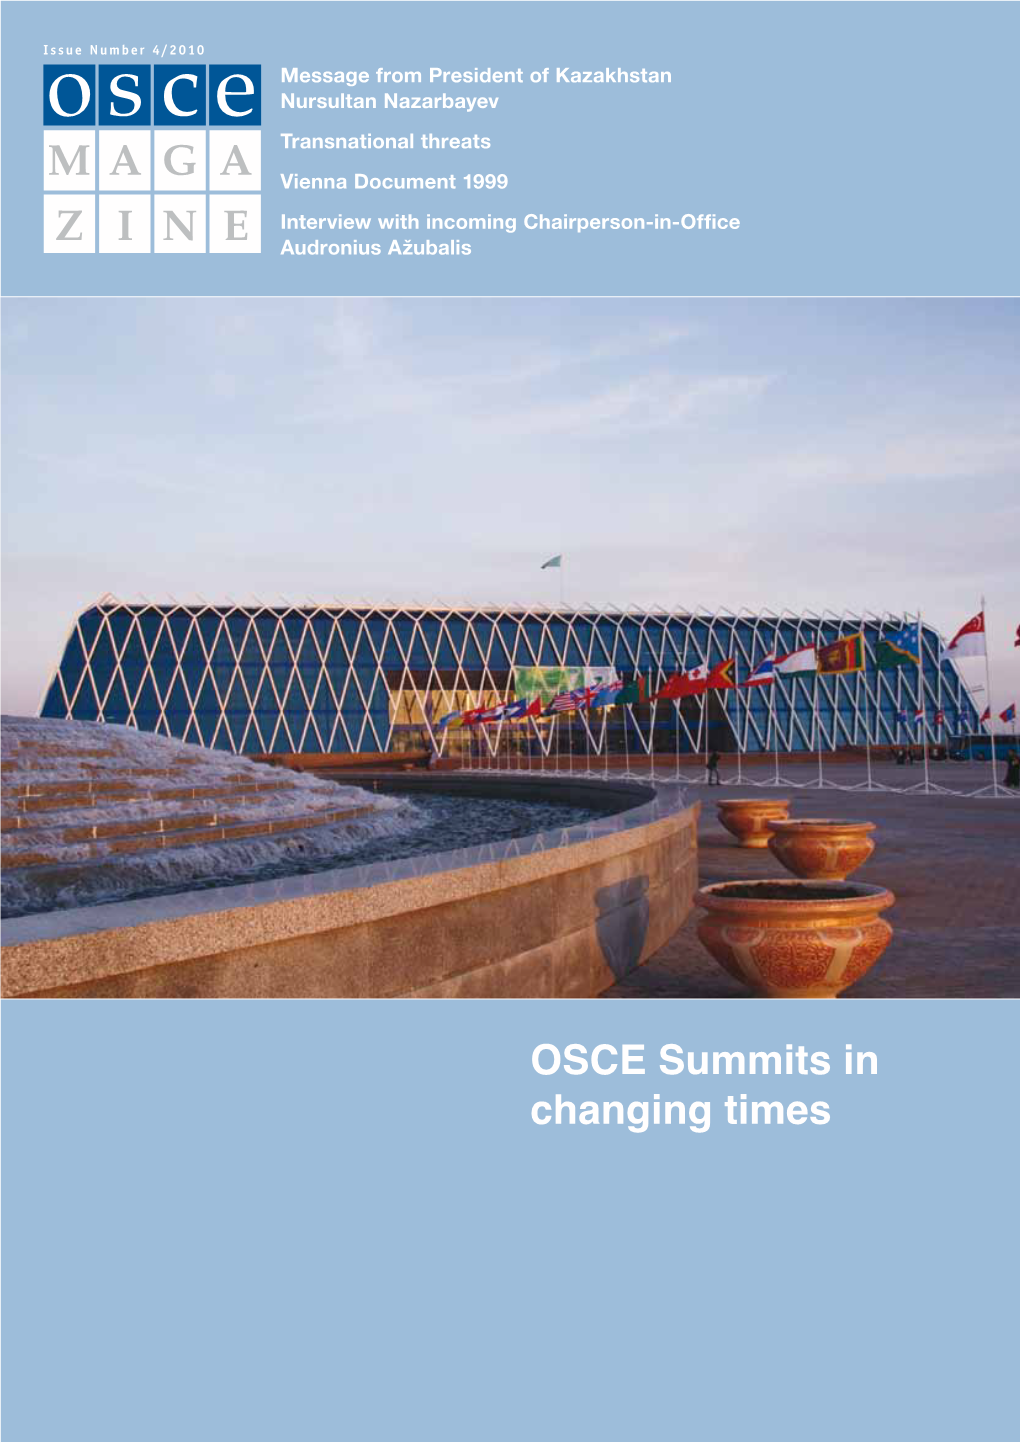 OSCE Summits in Changing Times